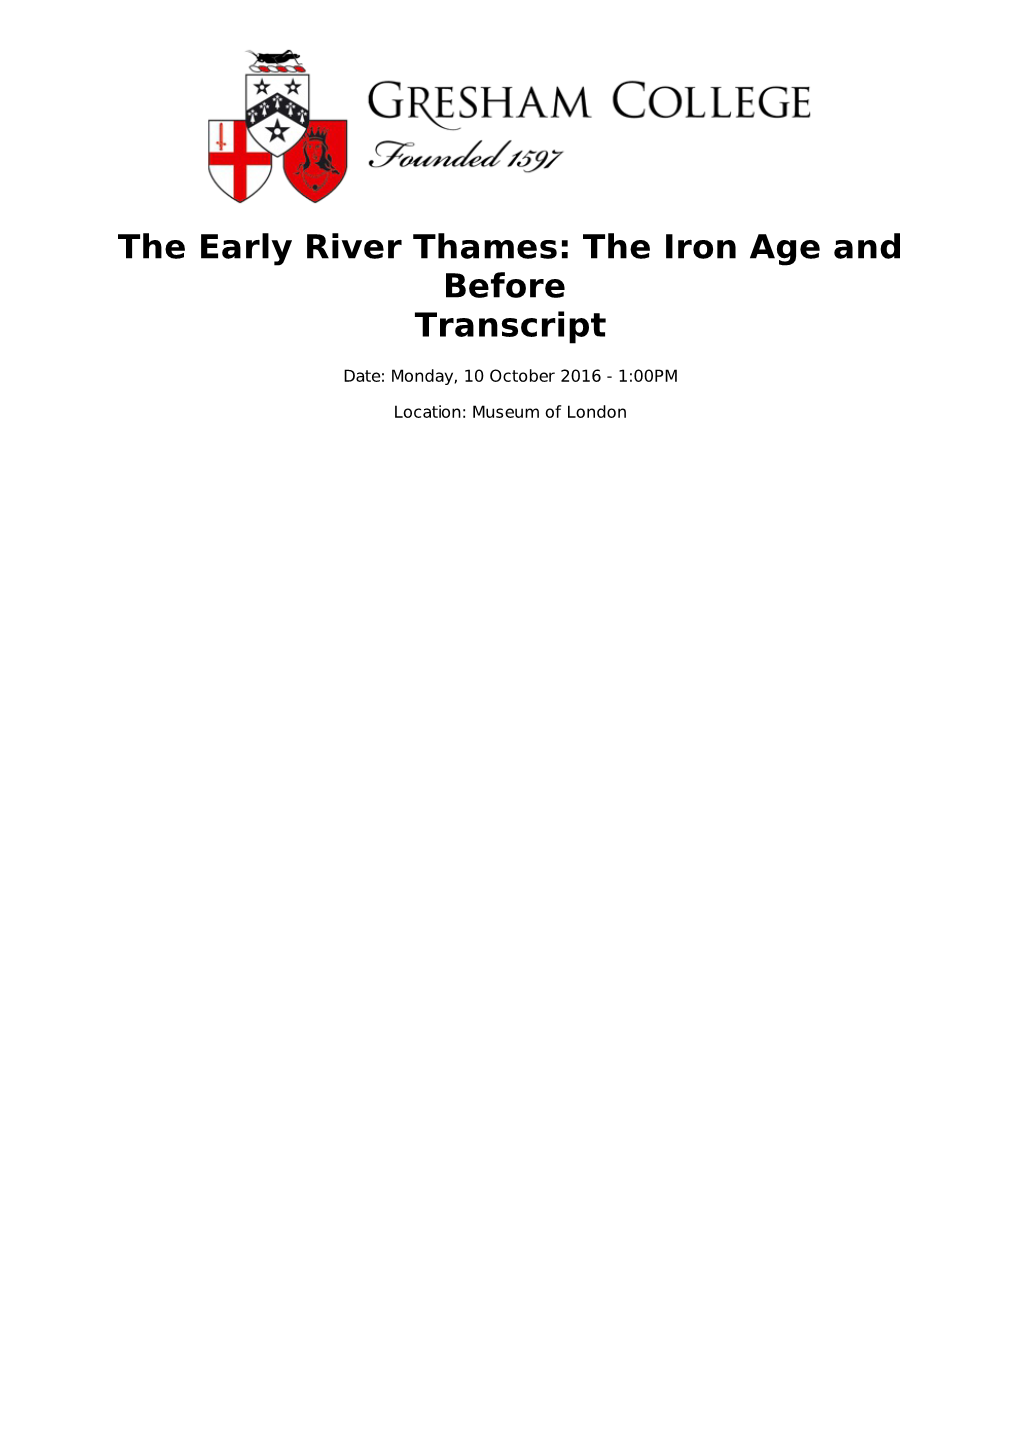 The Early River Thames: the Iron Age and Before Transcript